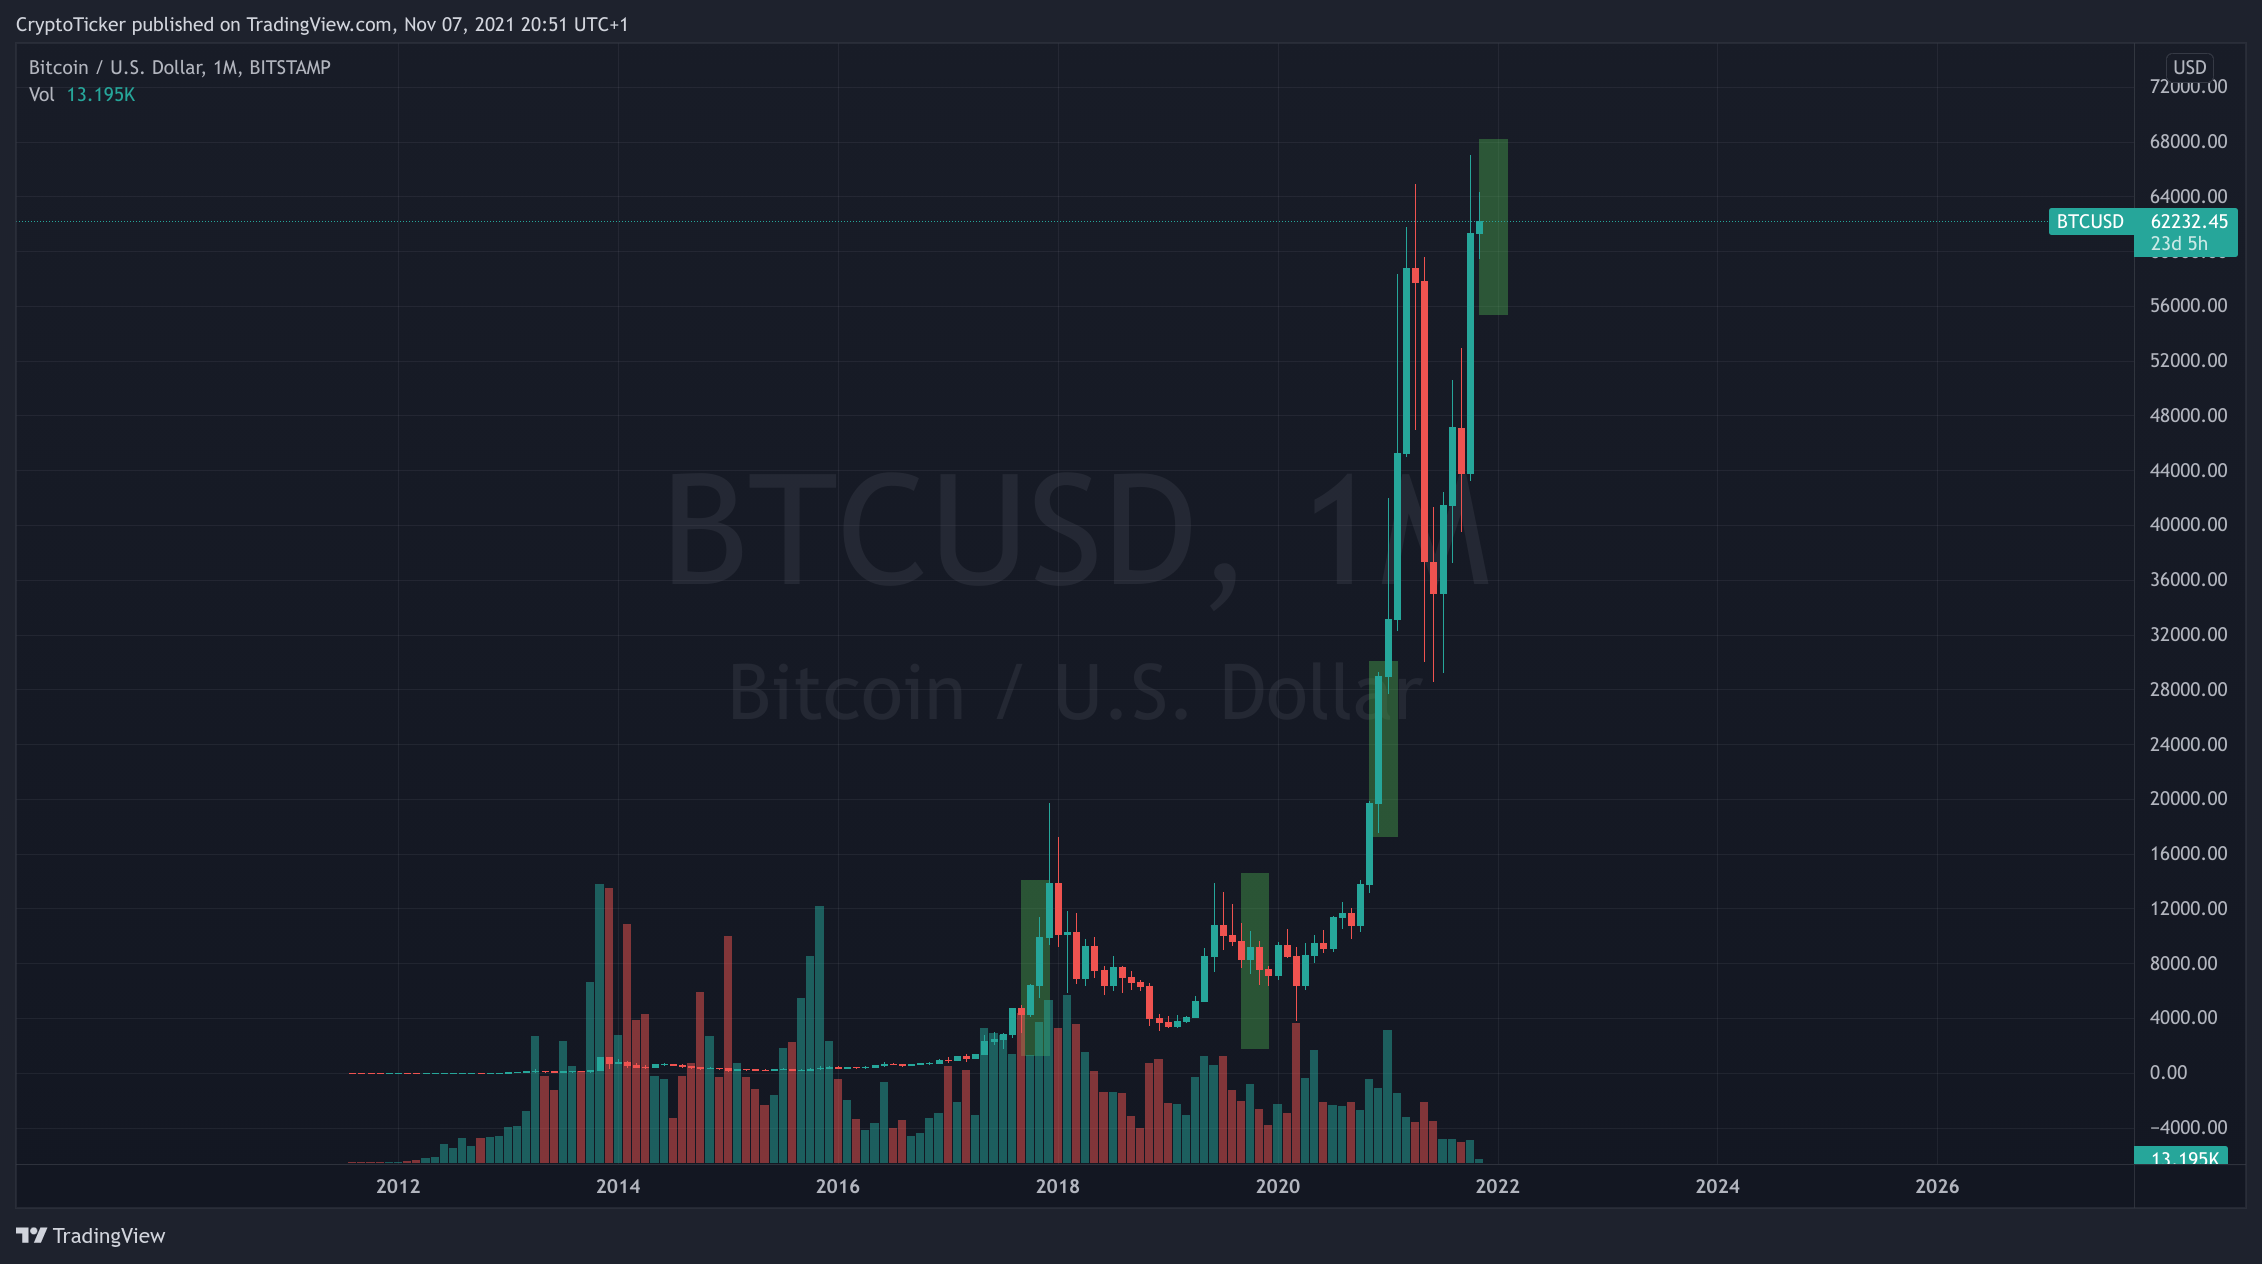 BTC/USD 1-month chart showing how BTC acted towards the end of each year 